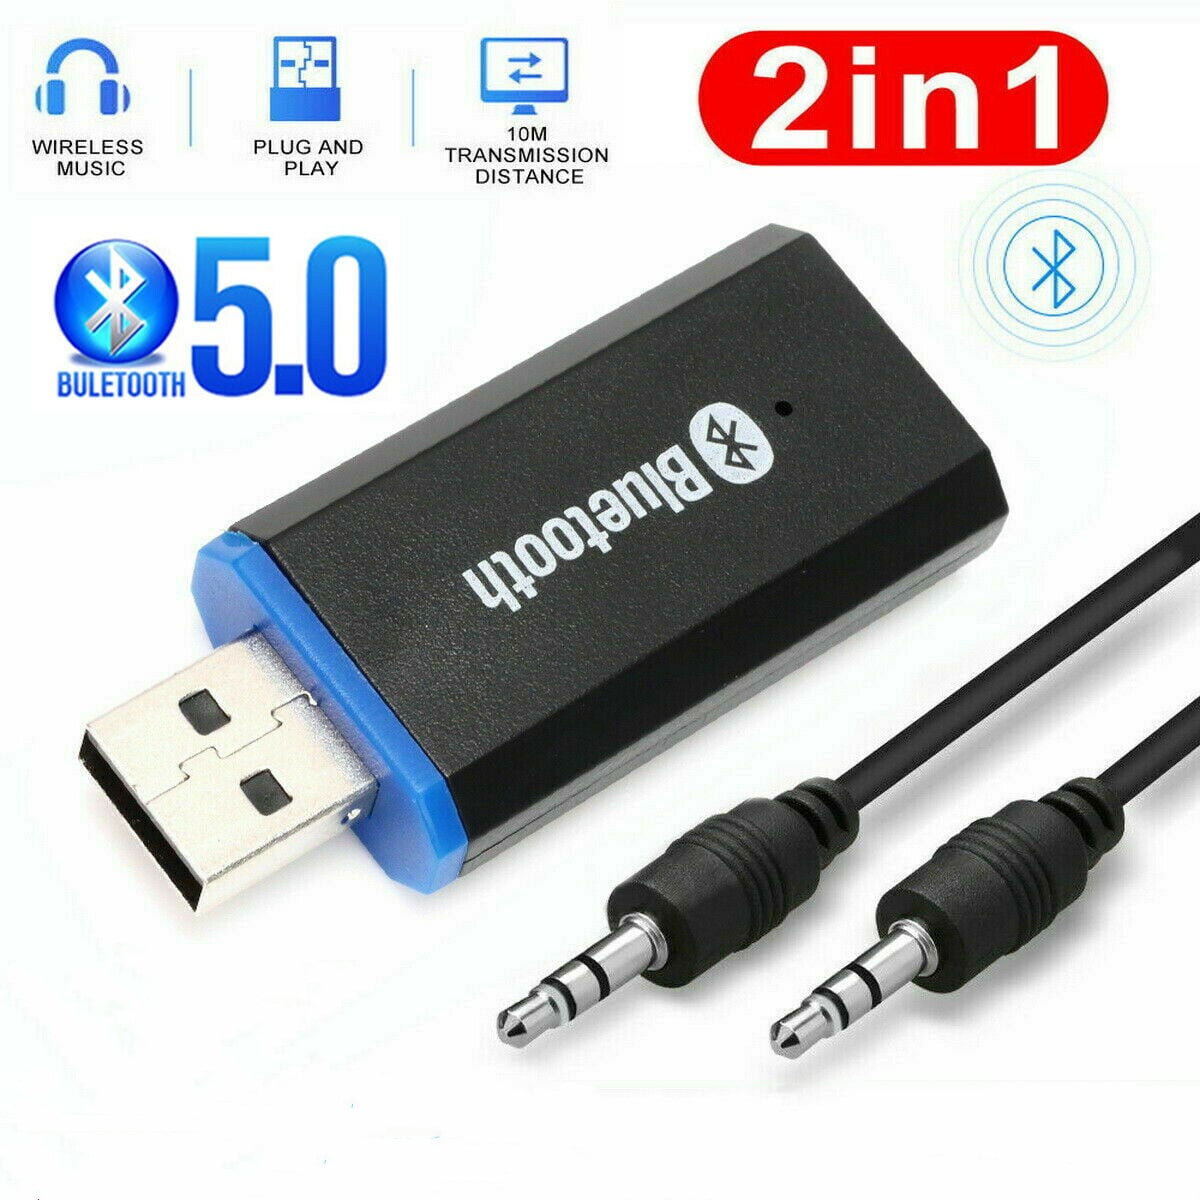 Wireless Bluetooth USB 3.5 mm AUX Audio Stereo Music Receiver Adapter Car Home 